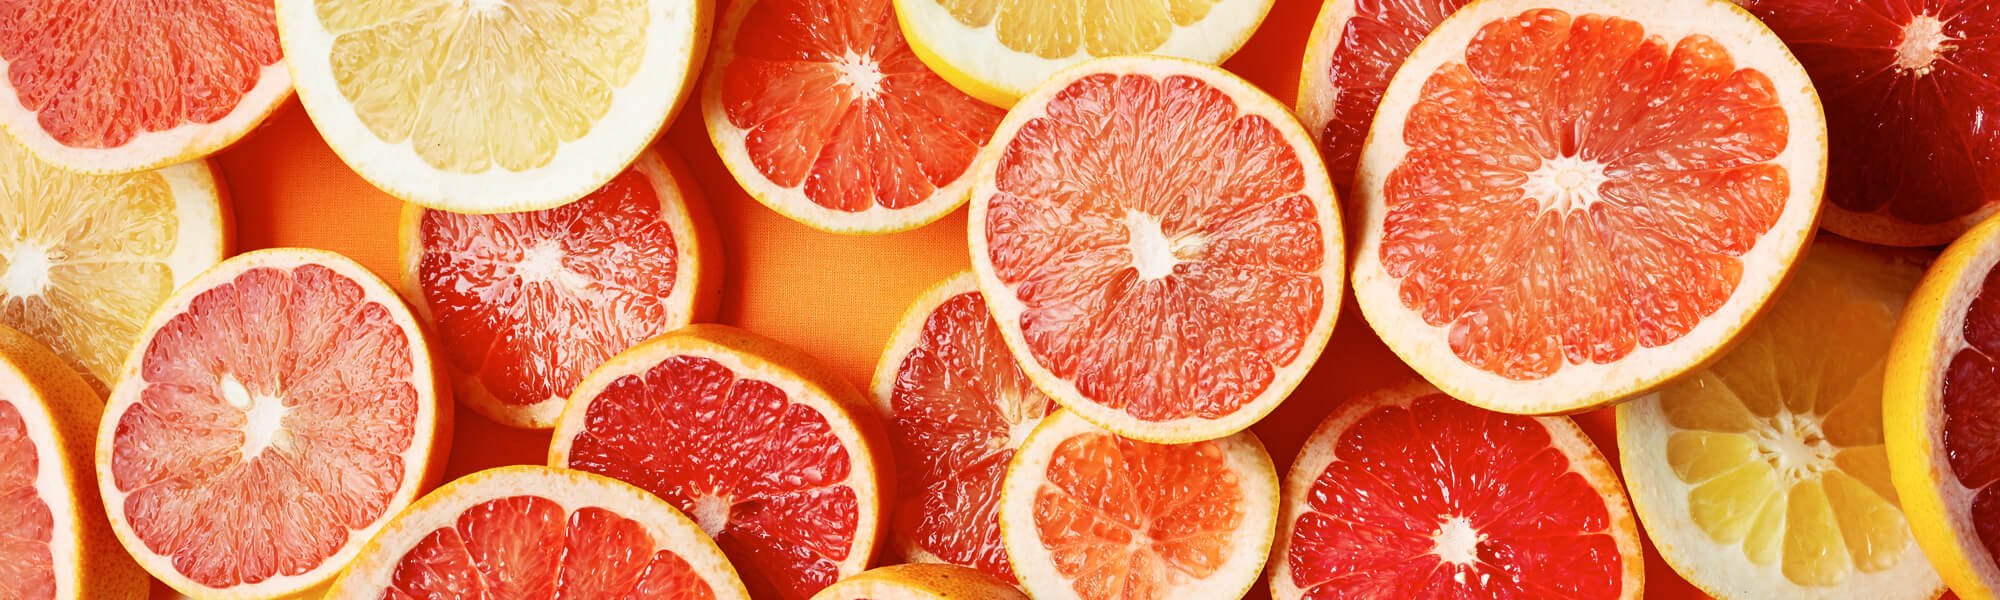 Vitamin C Benefits For The Skin Eat Your Veg To Get Glowing Article